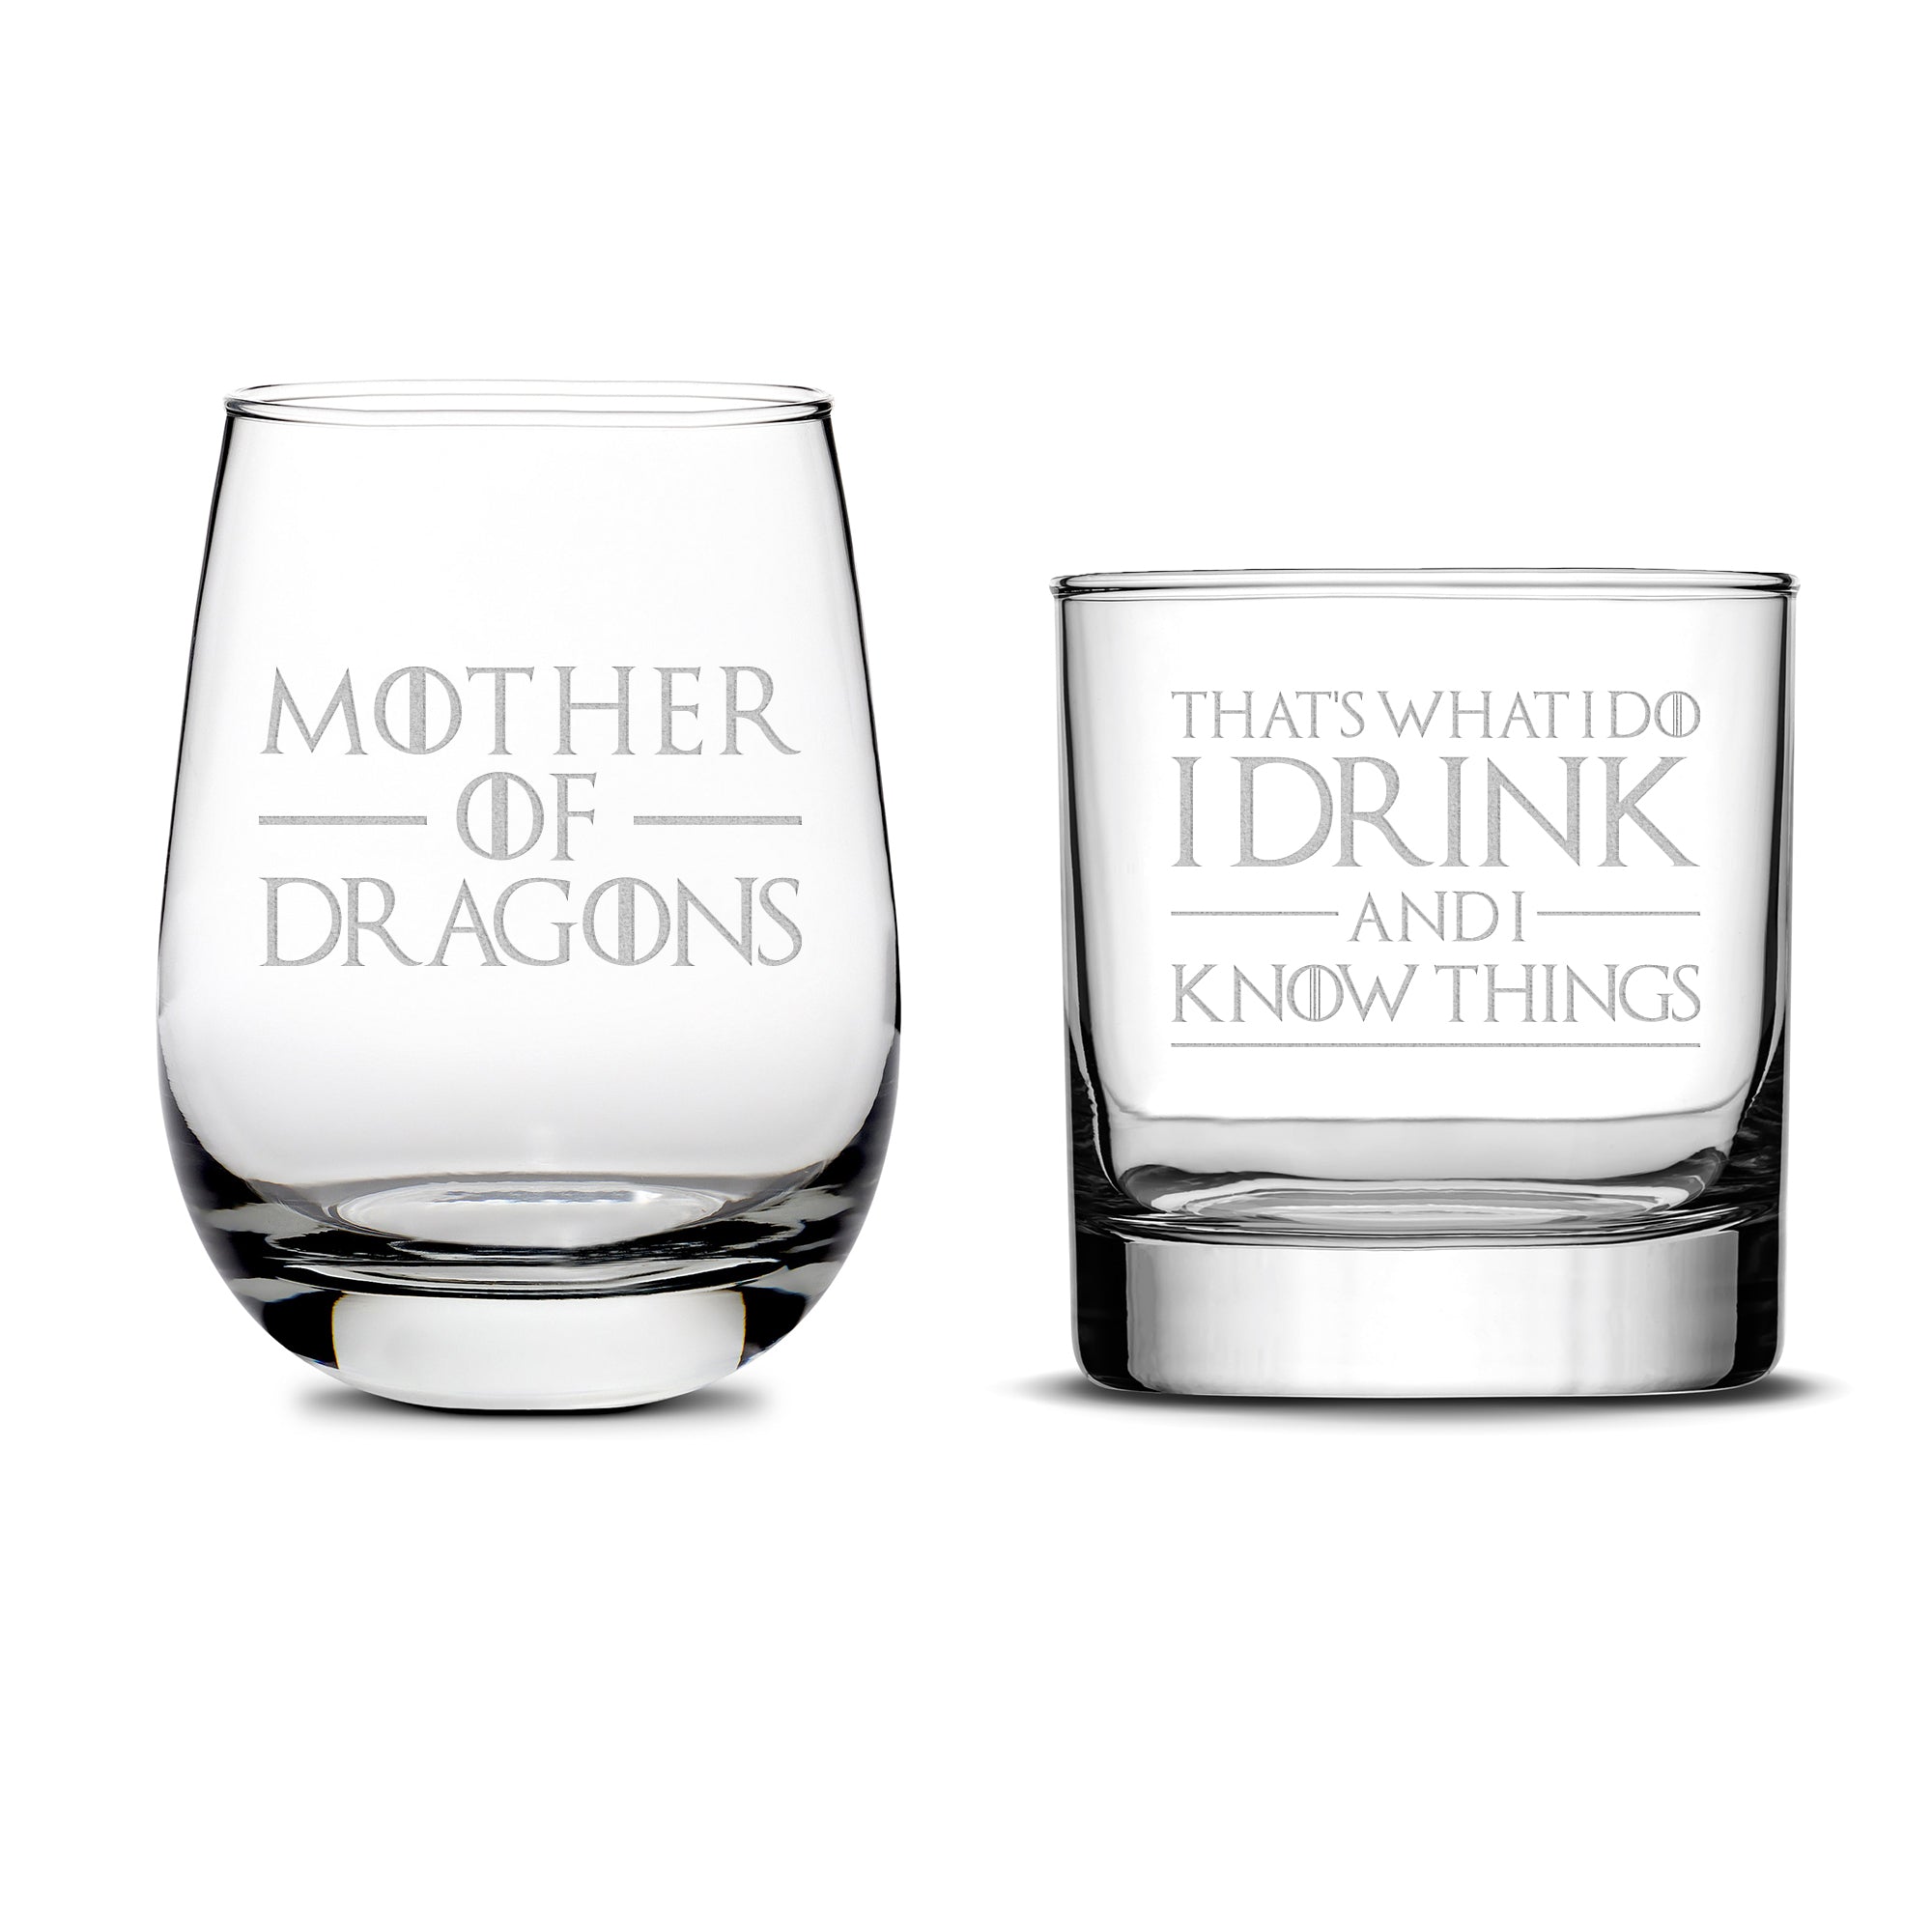 Premium Wine Glass (Mother of Dragons), Whiskey Glass (I Drink and I Know Things), Set of 2, Laser Etched or Hand Etched